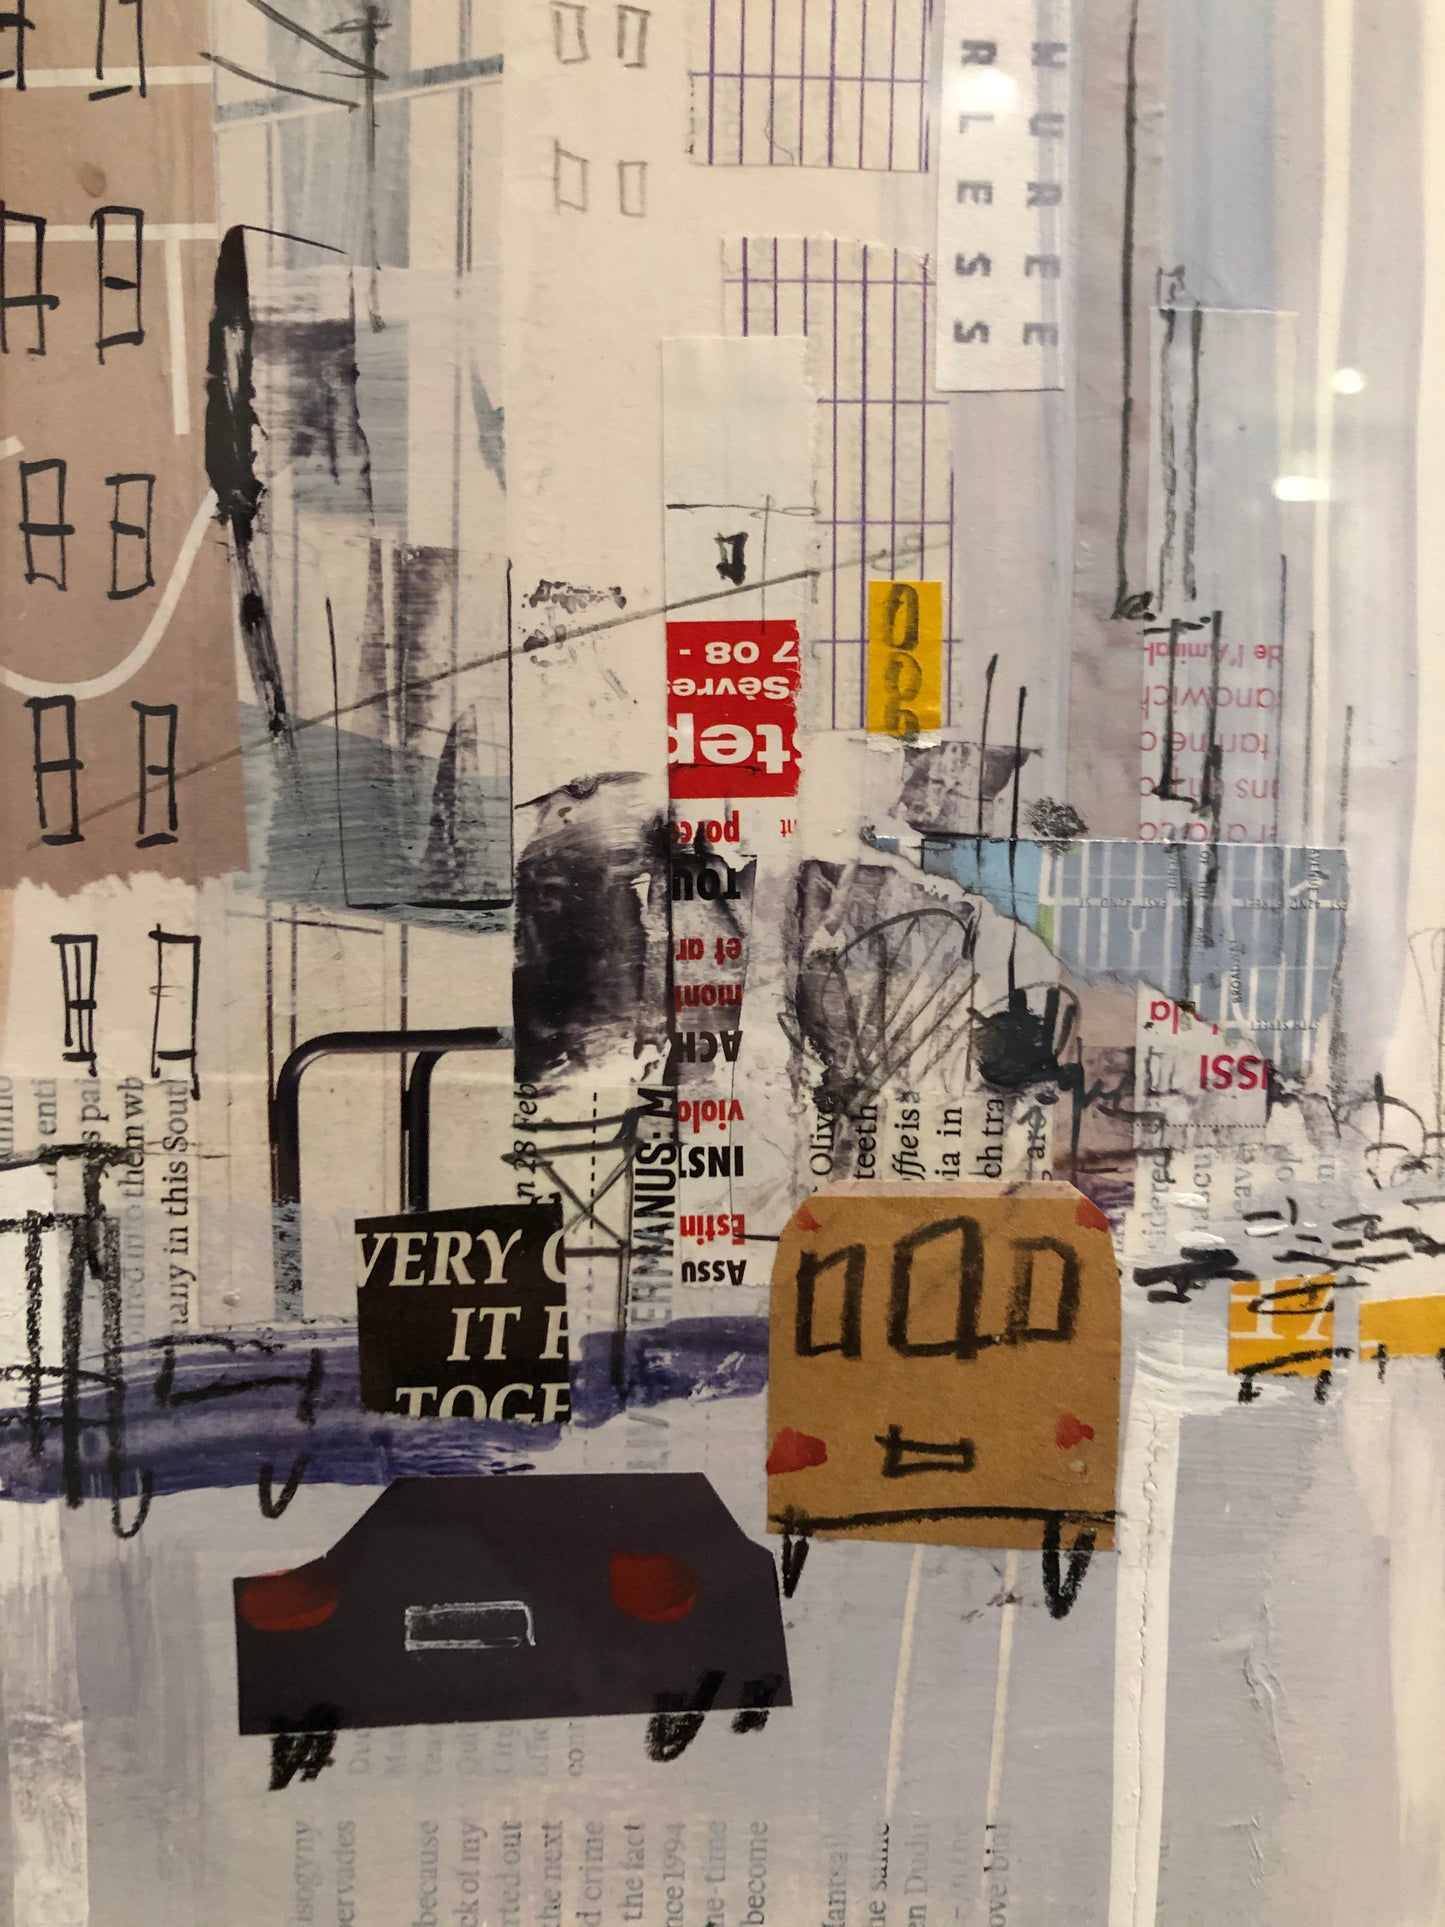 7th Avenue Study by Tom Butler